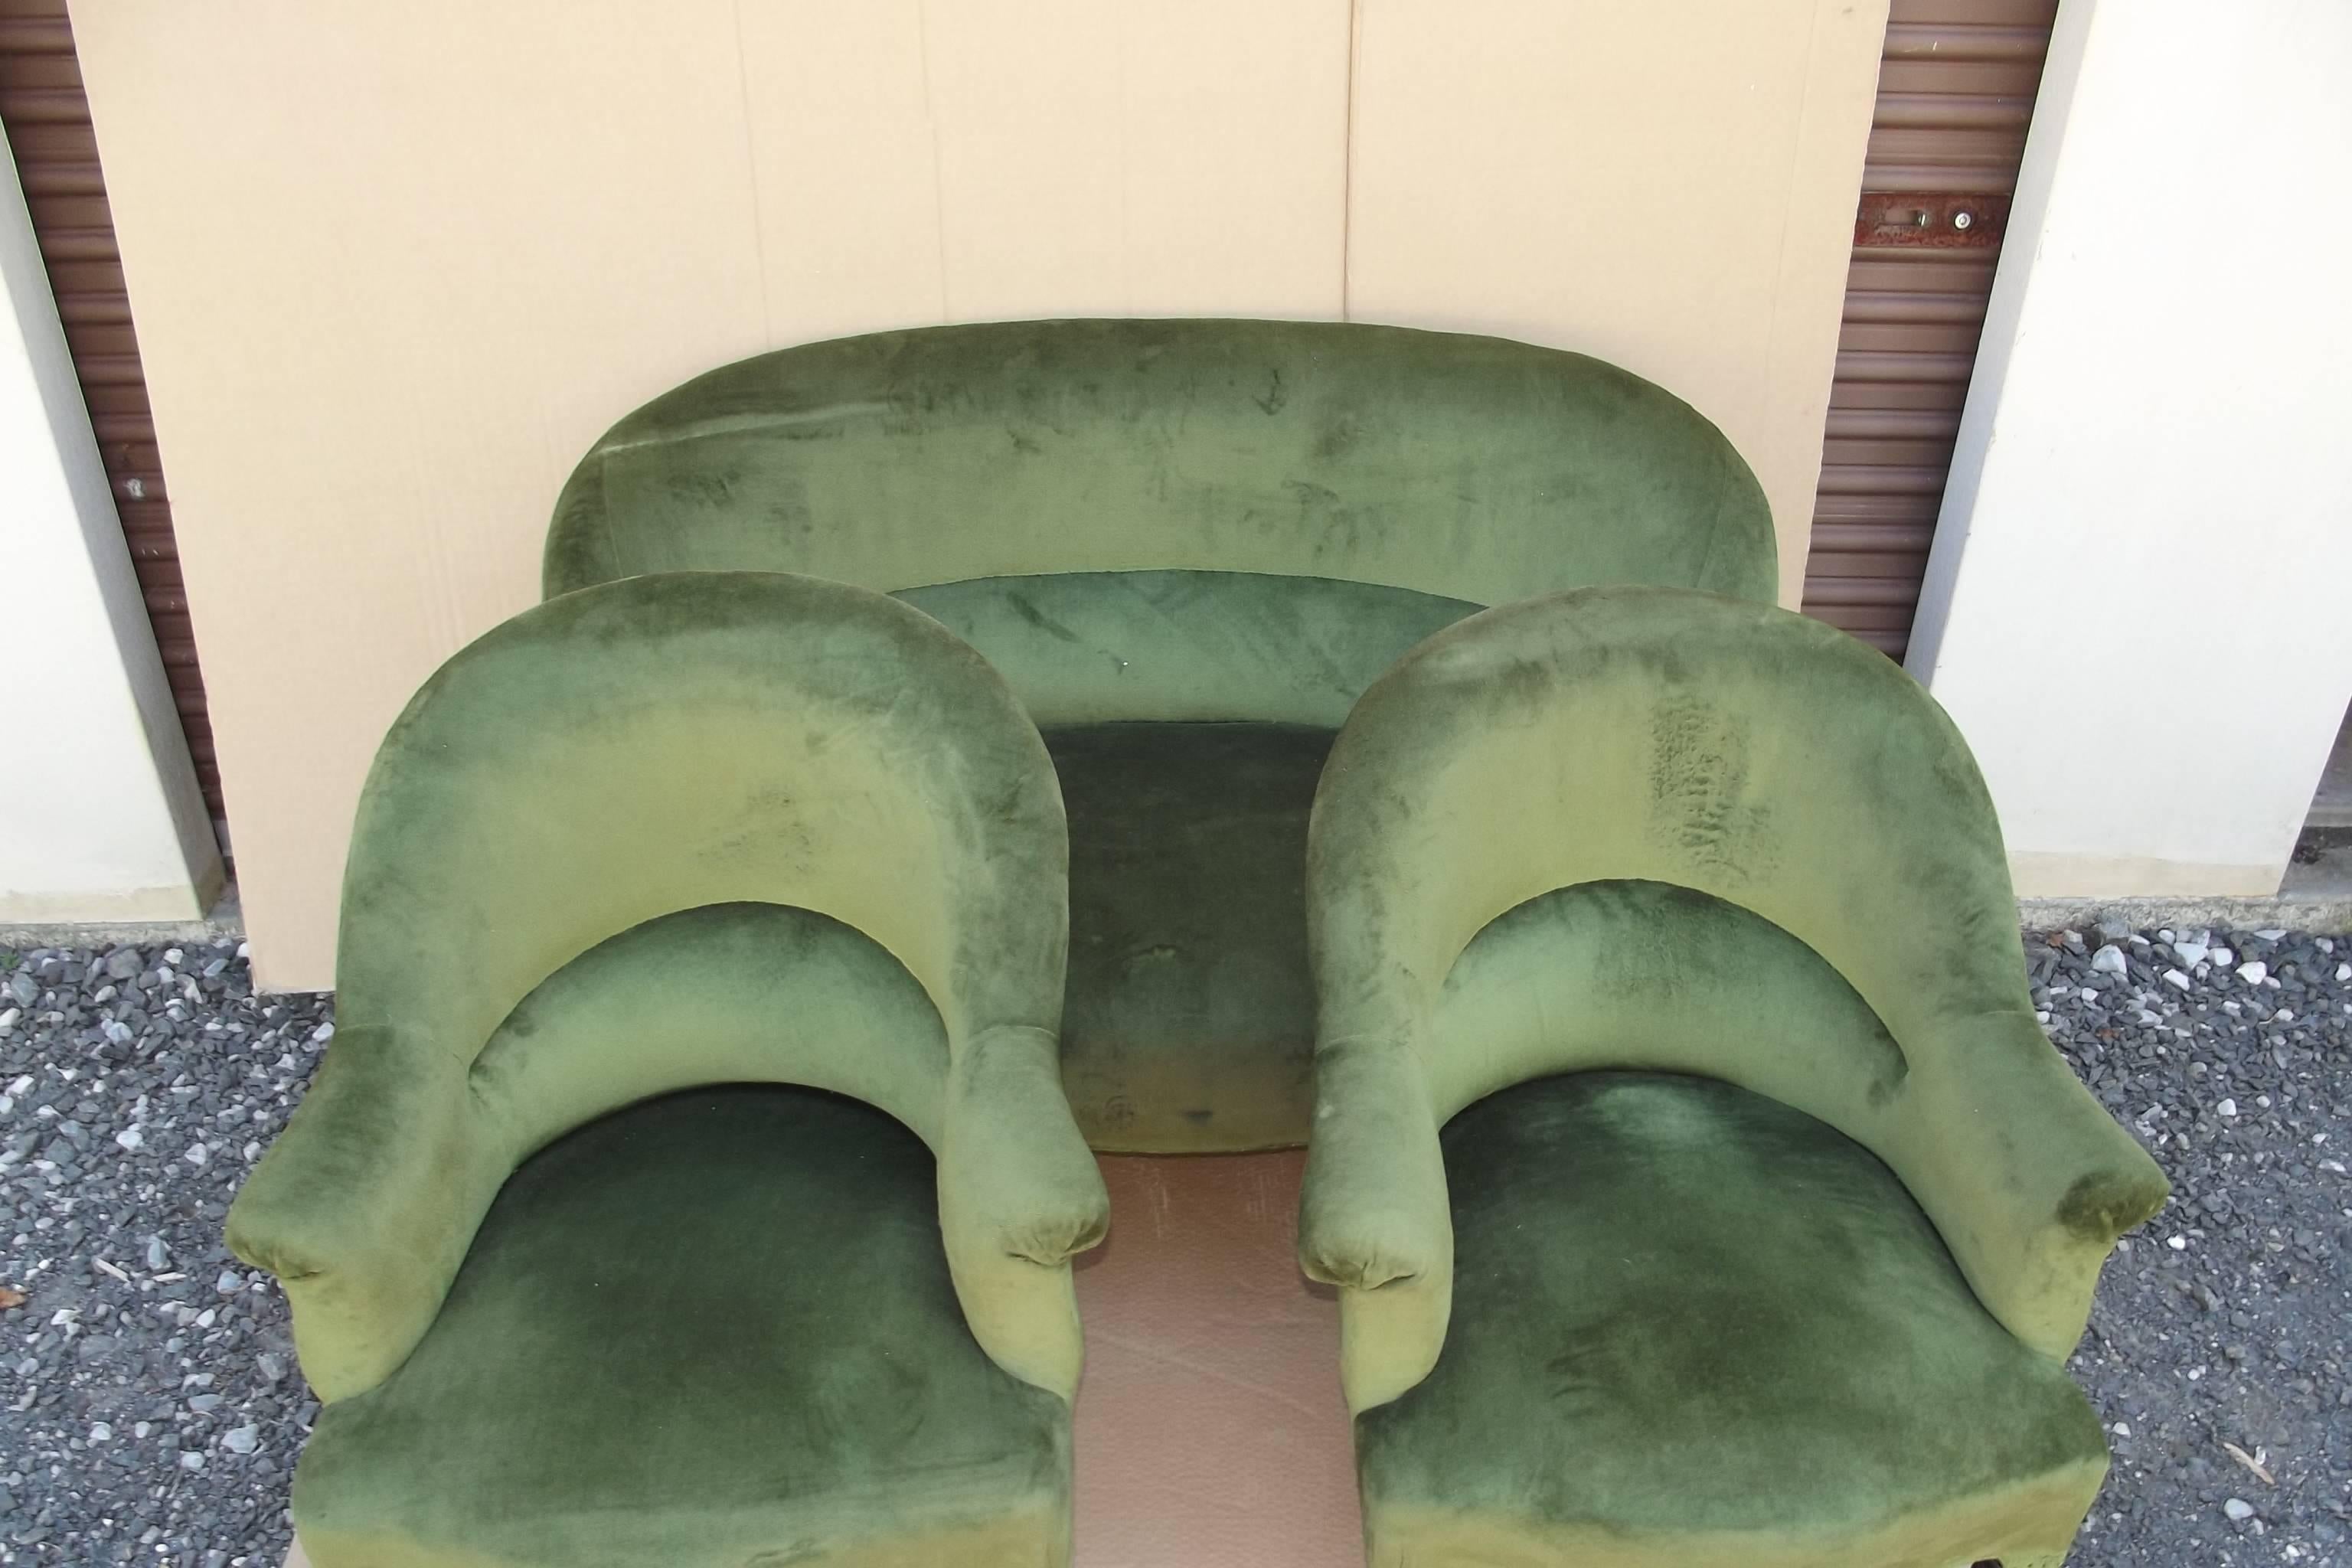 A three piece period Napoleon III salon set consisting of a pair of armchairs and a settee.  The set is in good as found condition with usable upholstery but should be reupholstered.  The dimensions below are for the settee, the dimensions for the